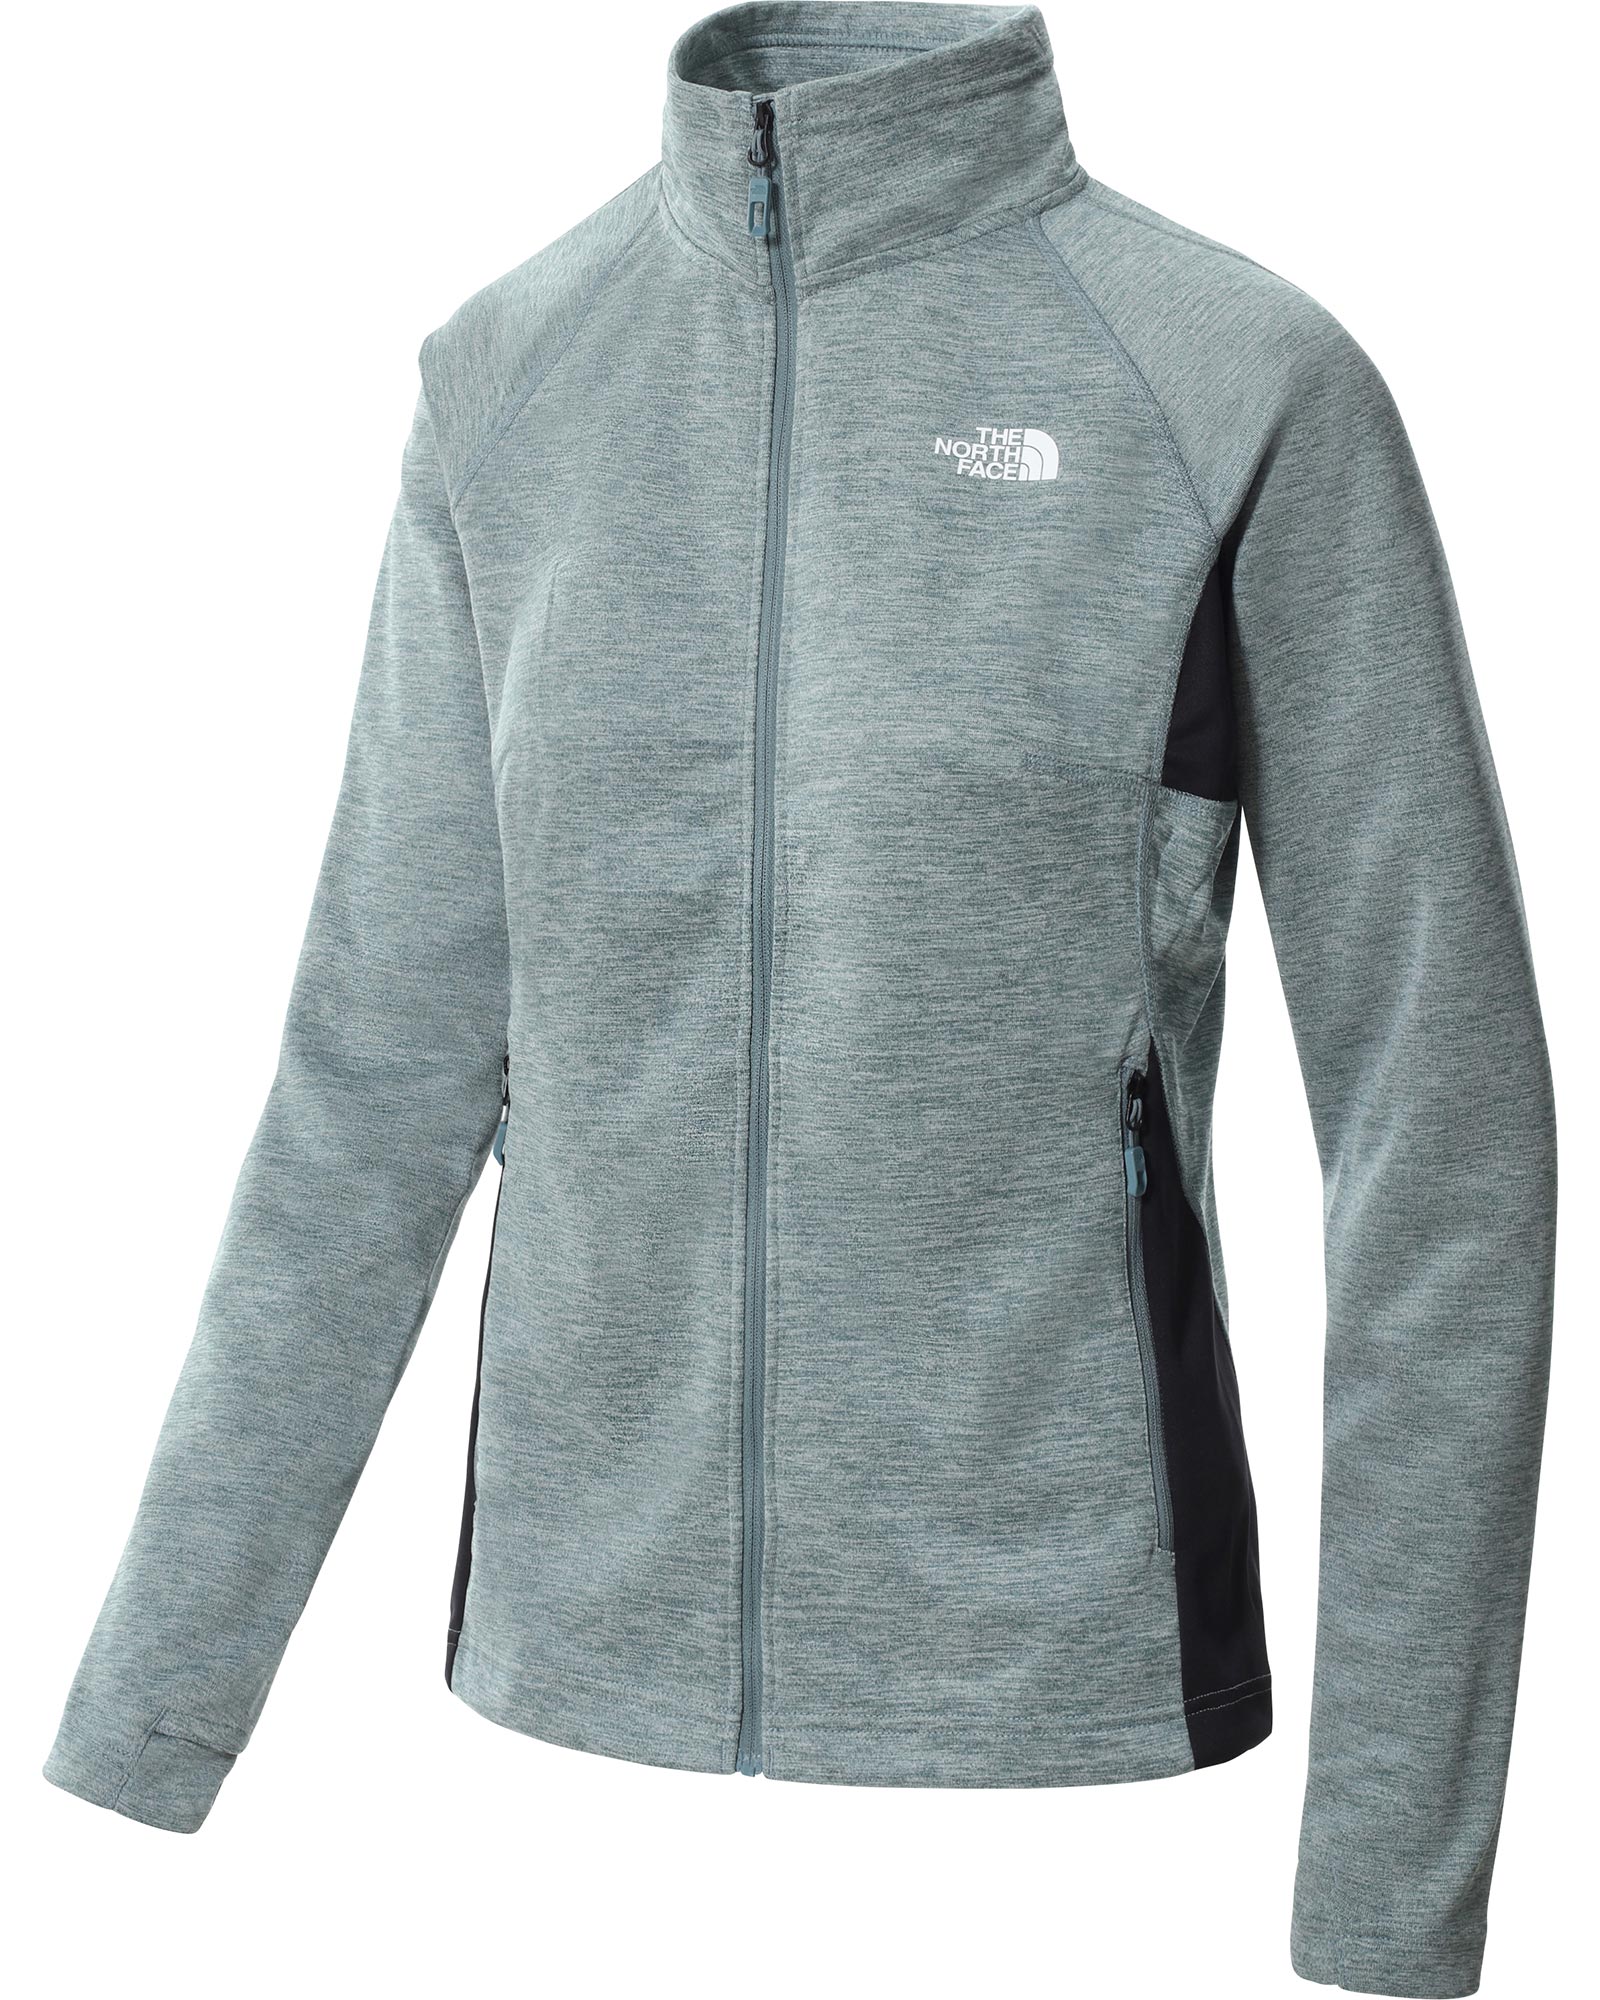 The North Face Ao Mid Layer Womens Full Zip Jacket